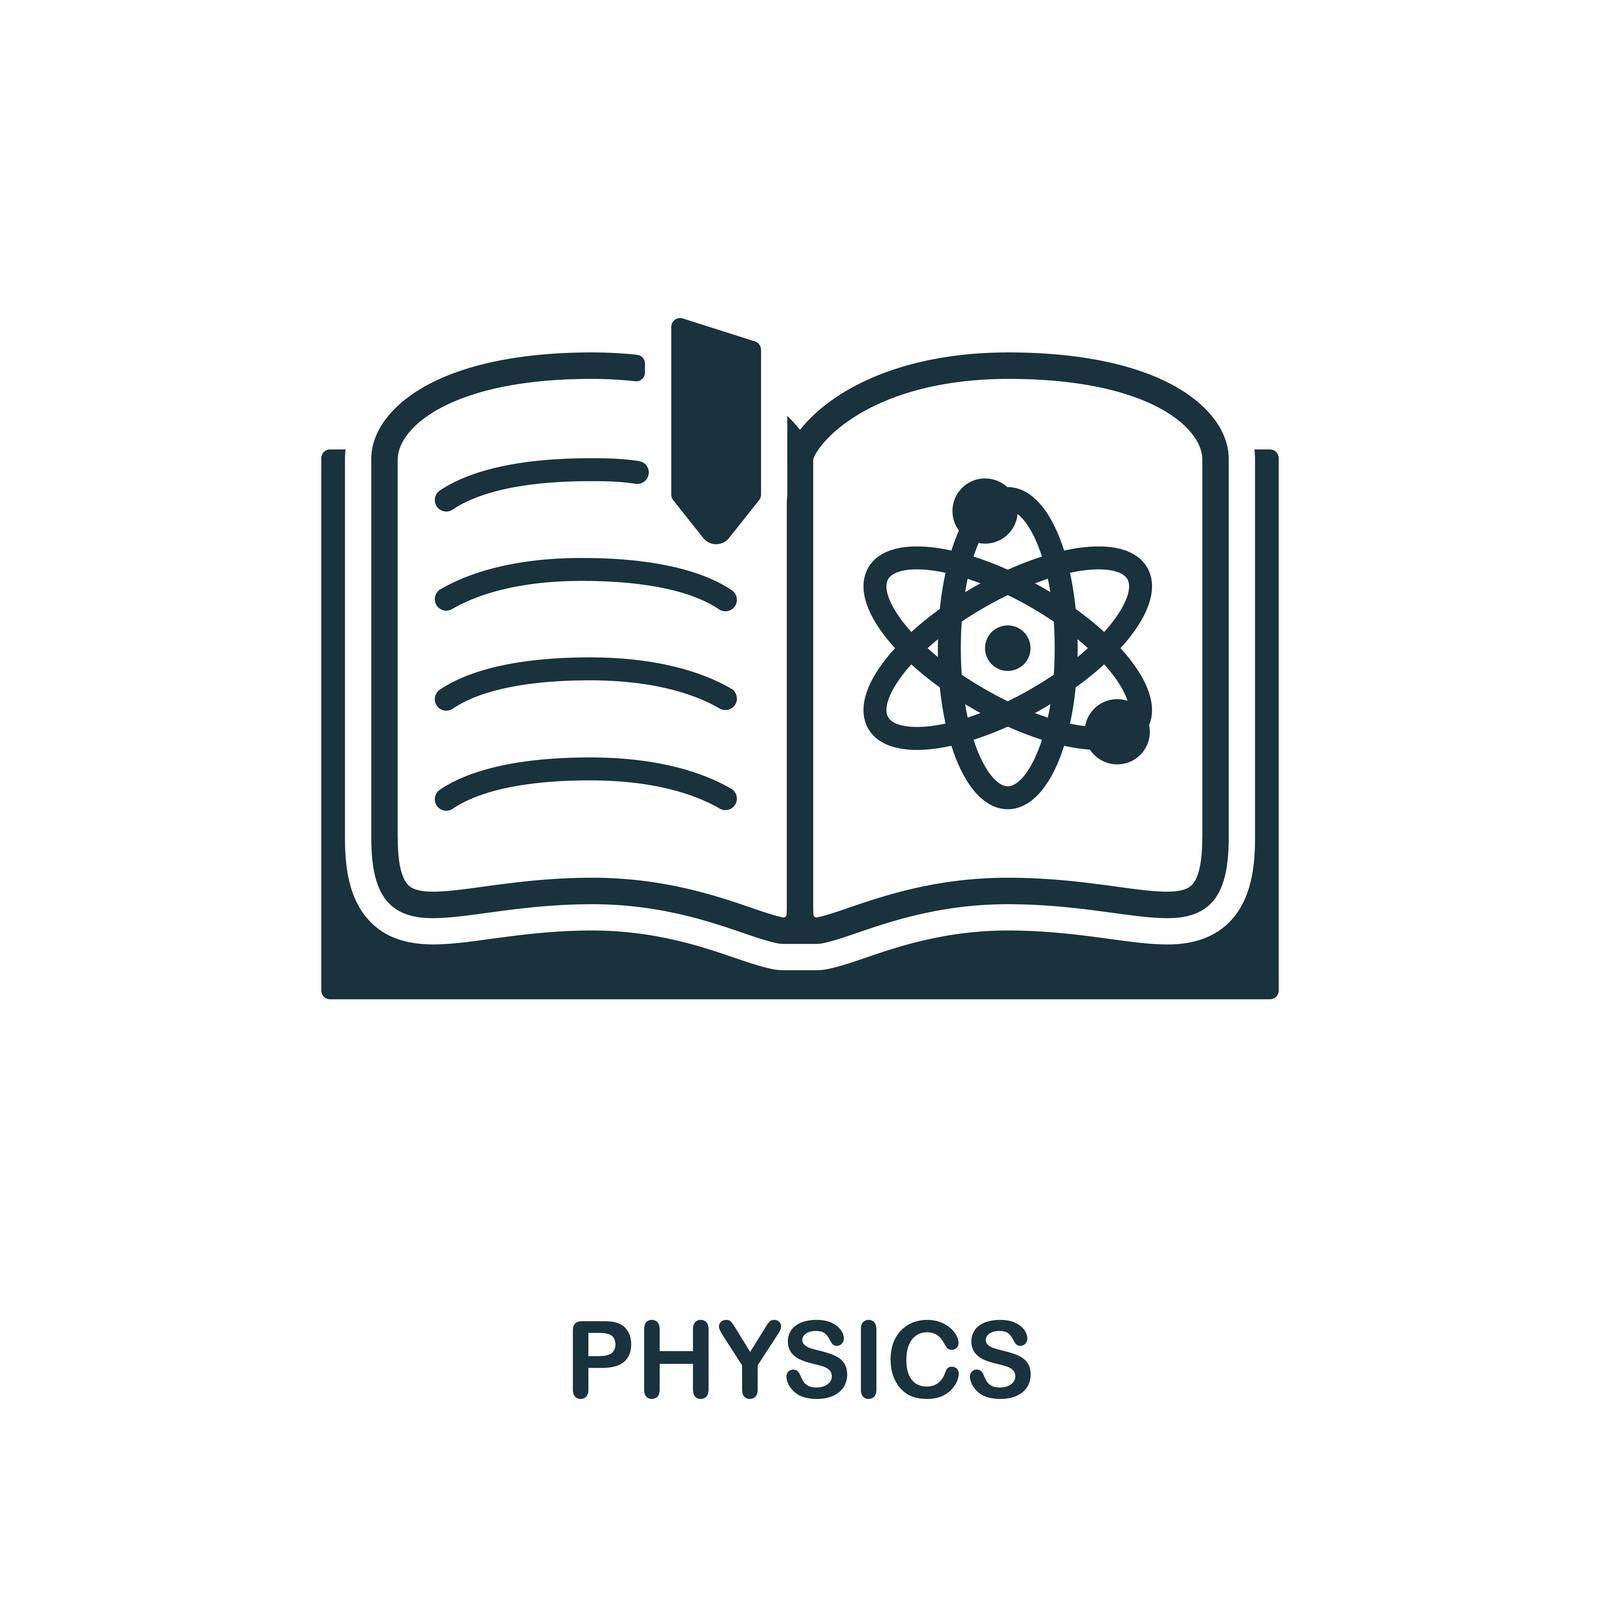 Physics icon. Monochrome sign from school education collection. Creative Physics icon illustration for web design, infographics and more by simakovavector